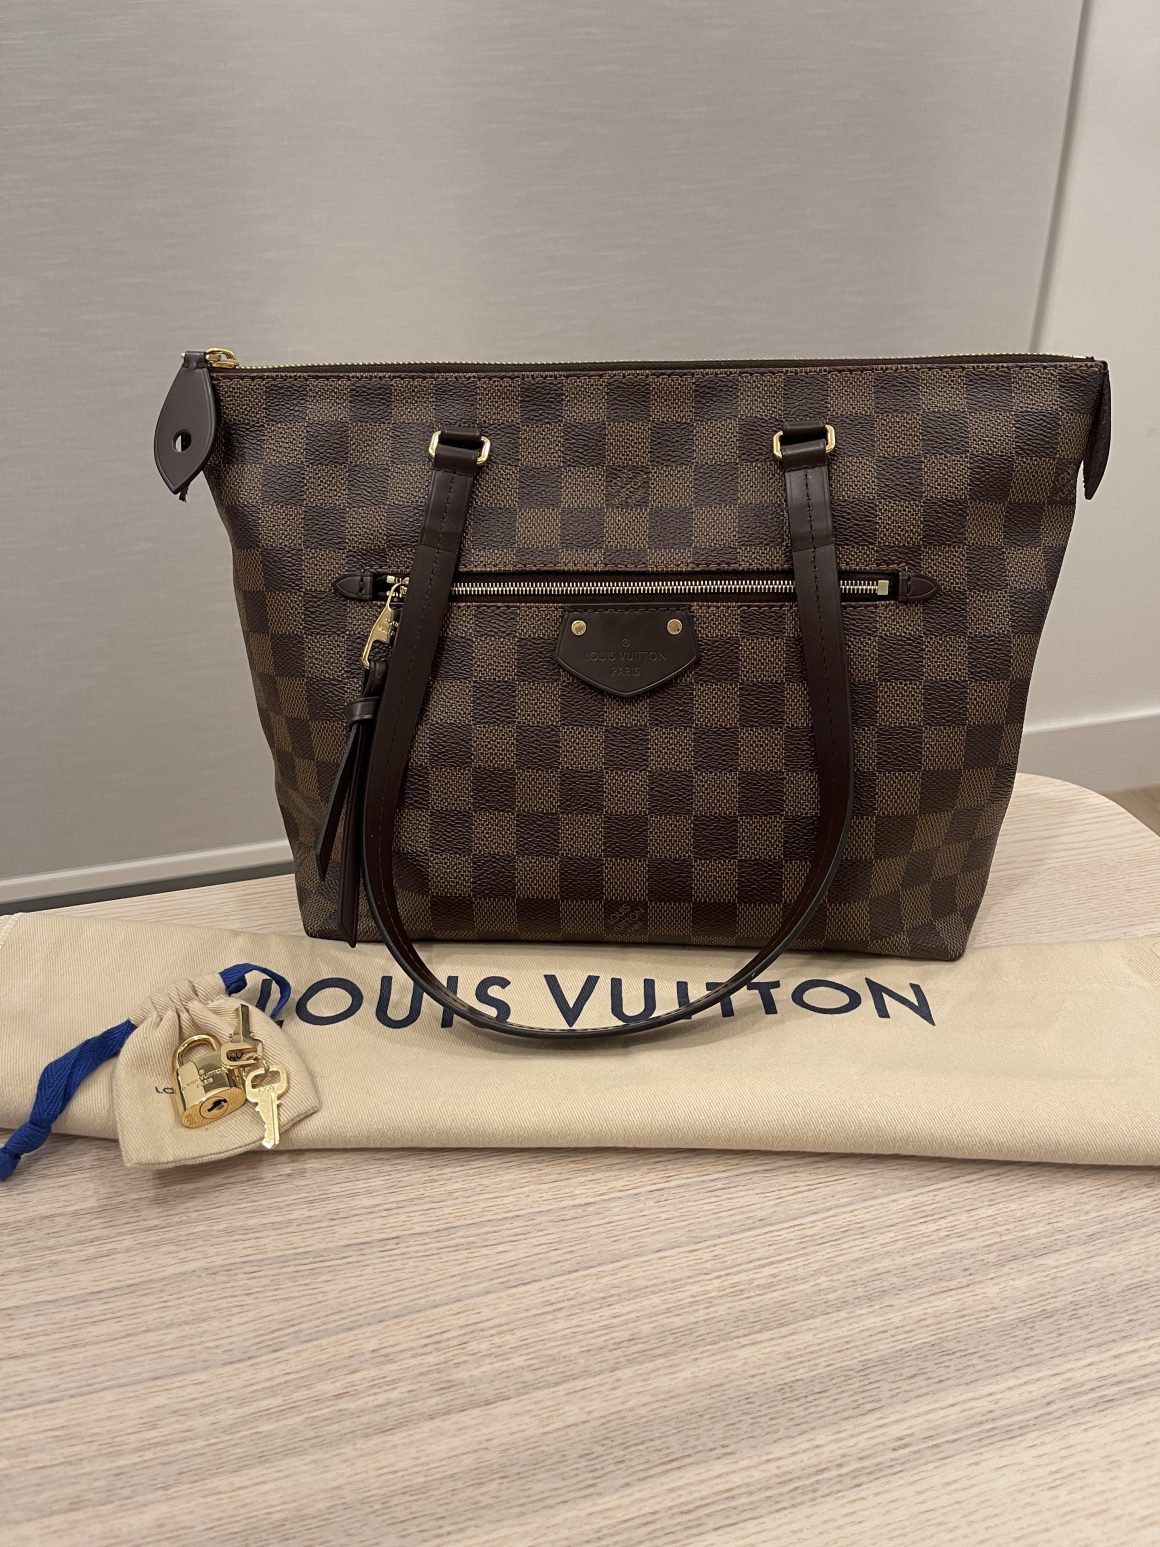 Fashionbw 2018 - Preloved Authentic Louis Vuitton Iena PM in Damier Ebene.  Bought in 2018. Only used 5 times. Comes with dust bag, box, paper bag and  receipt from LV UK. Retail